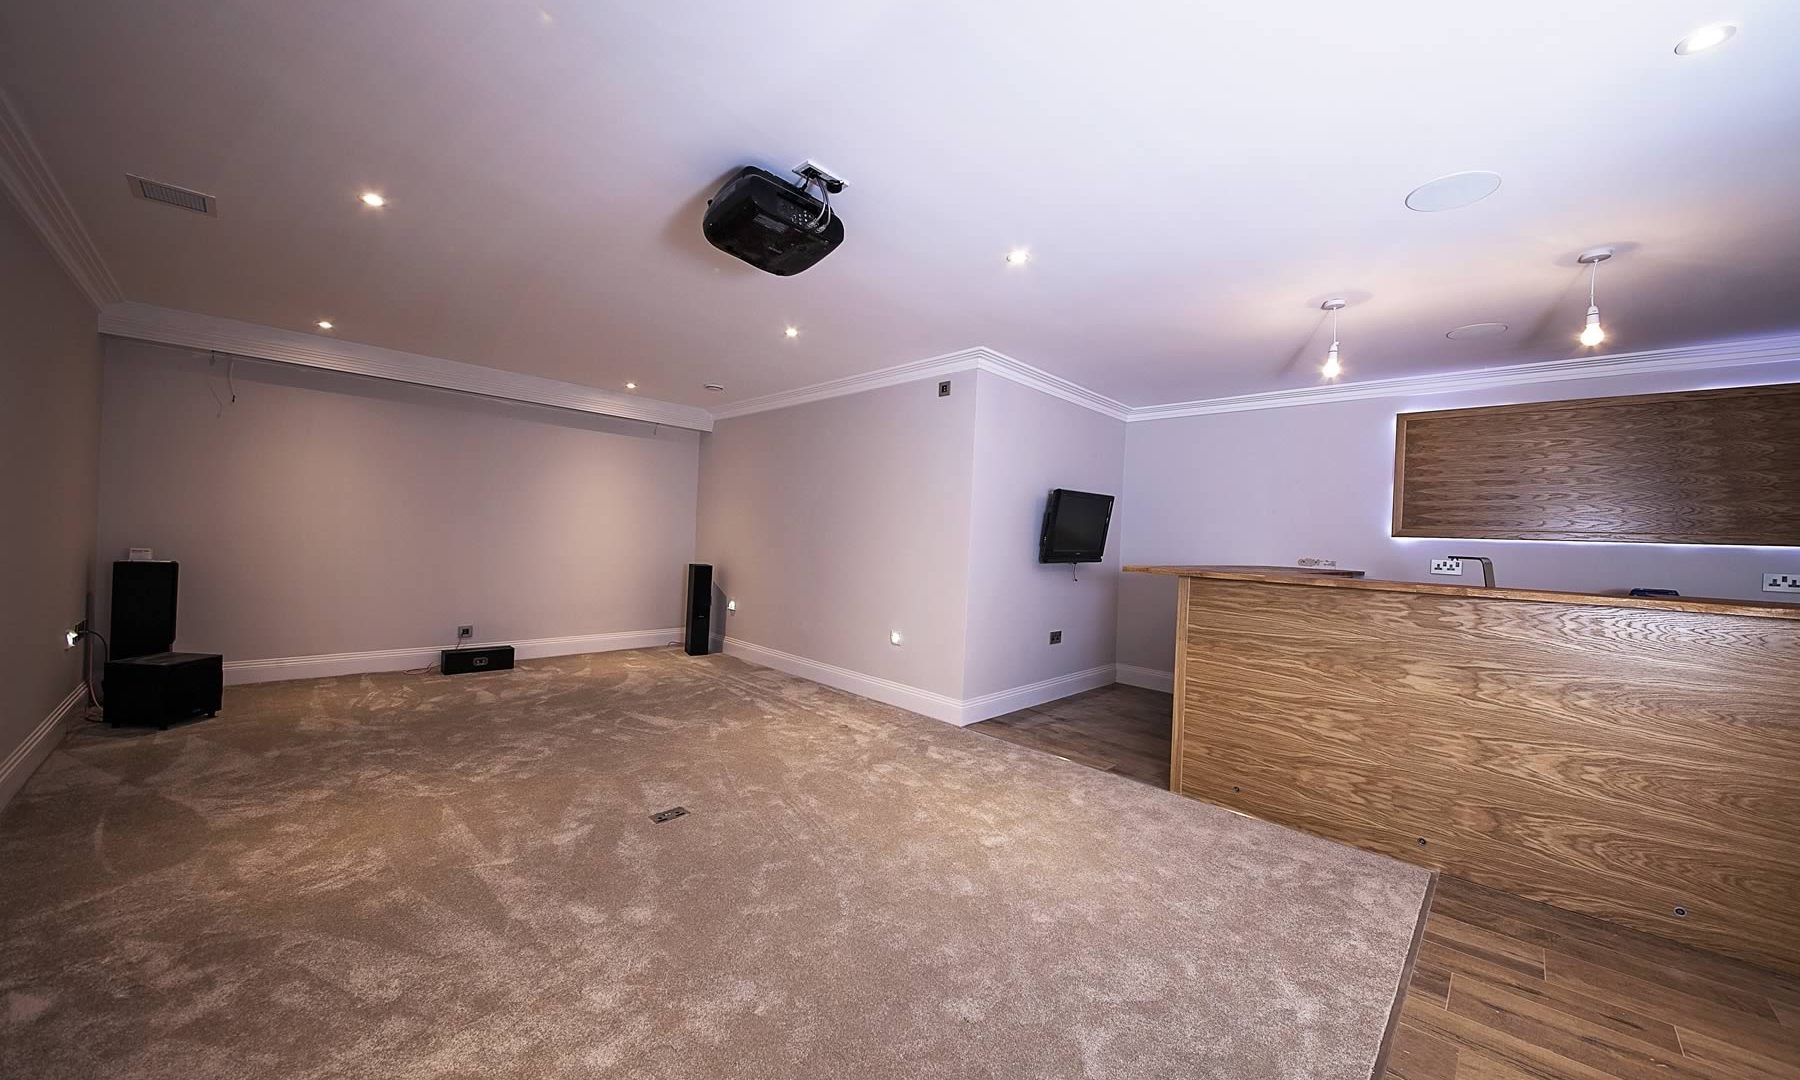 Spacious empty room with carpet and surround sound speakers.